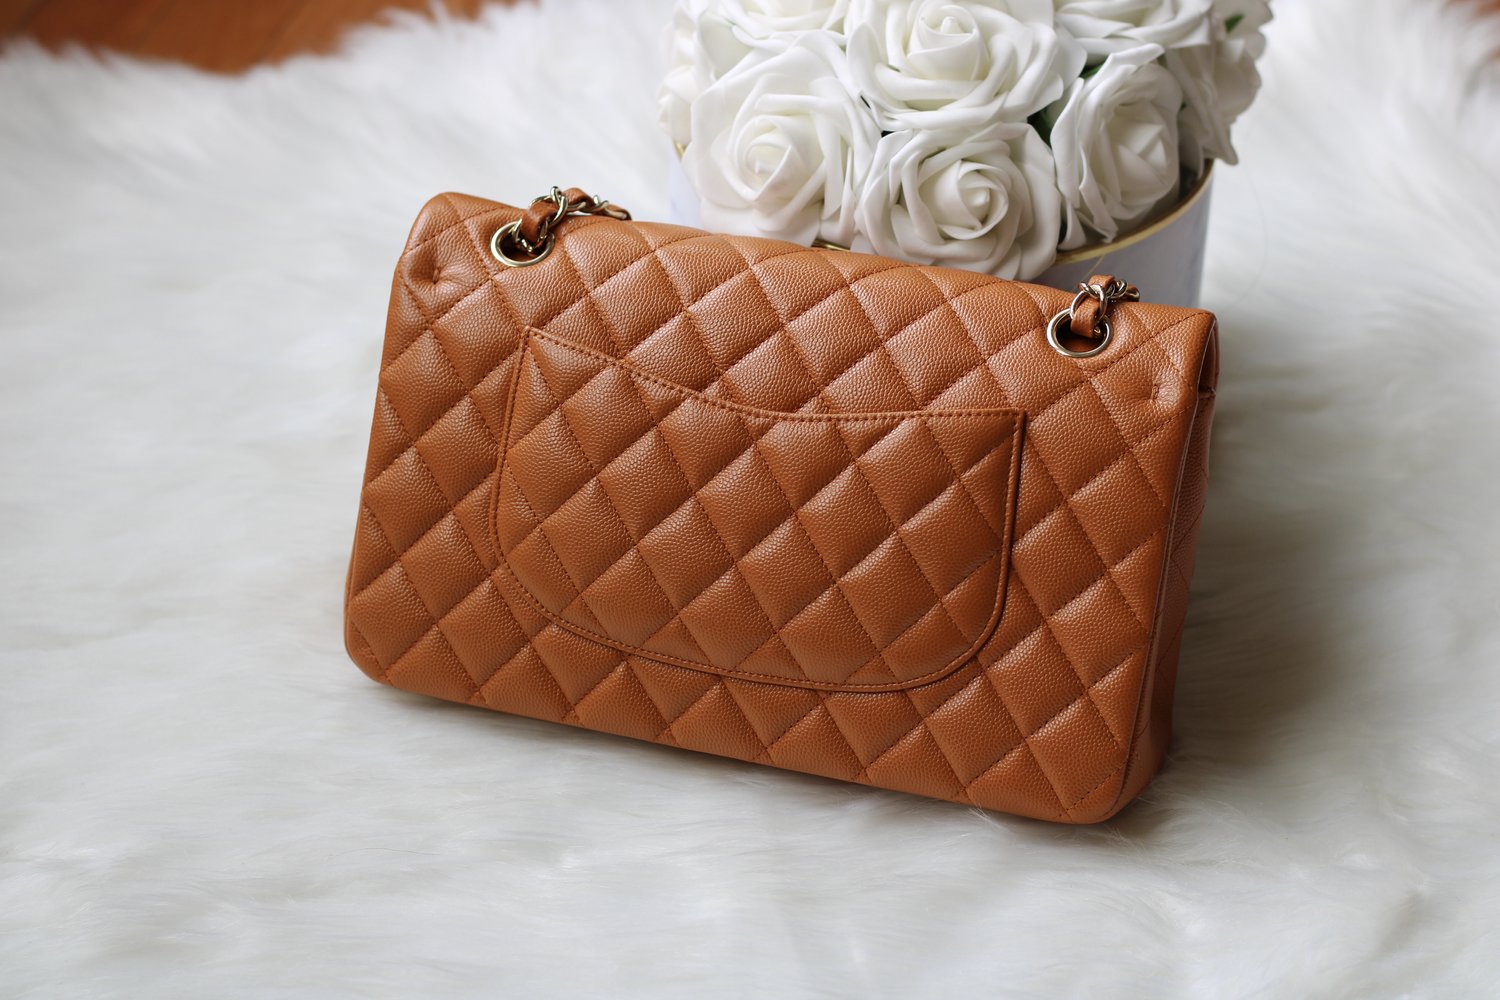 Chanel Coco Handle Mini, 21A Pumpkin Caramel Caviar Leather with Gold  Hardware, New in Box